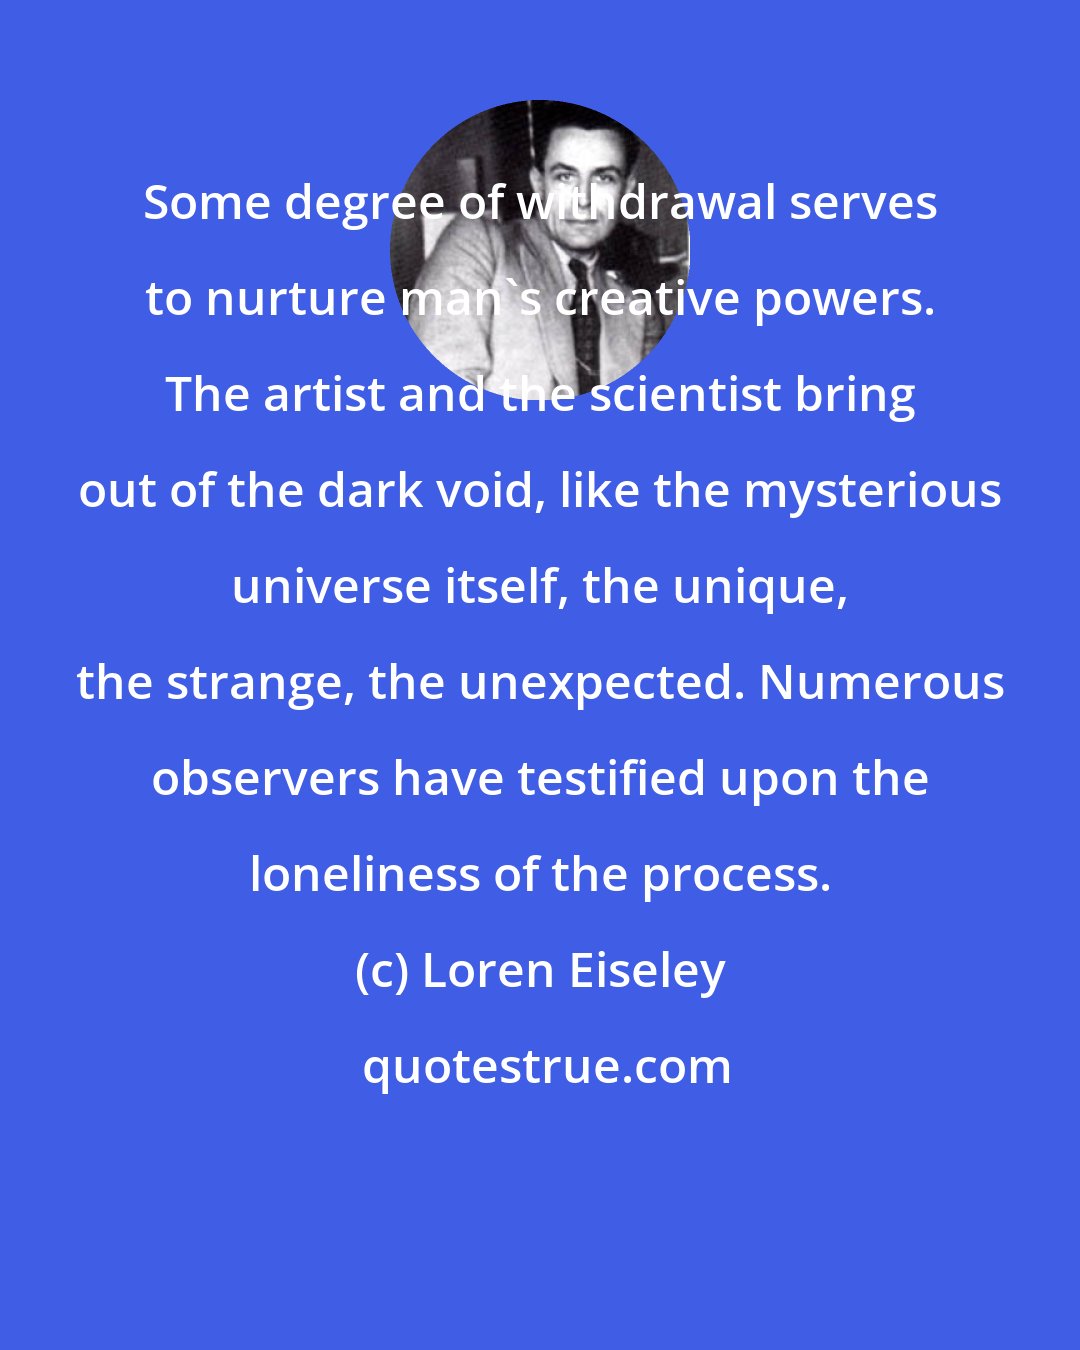 Loren Eiseley: Some degree of withdrawal serves to nurture man's creative powers. The artist and the scientist bring out of the dark void, like the mysterious universe itself, the unique, the strange, the unexpected. Numerous observers have testified upon the loneliness of the process.